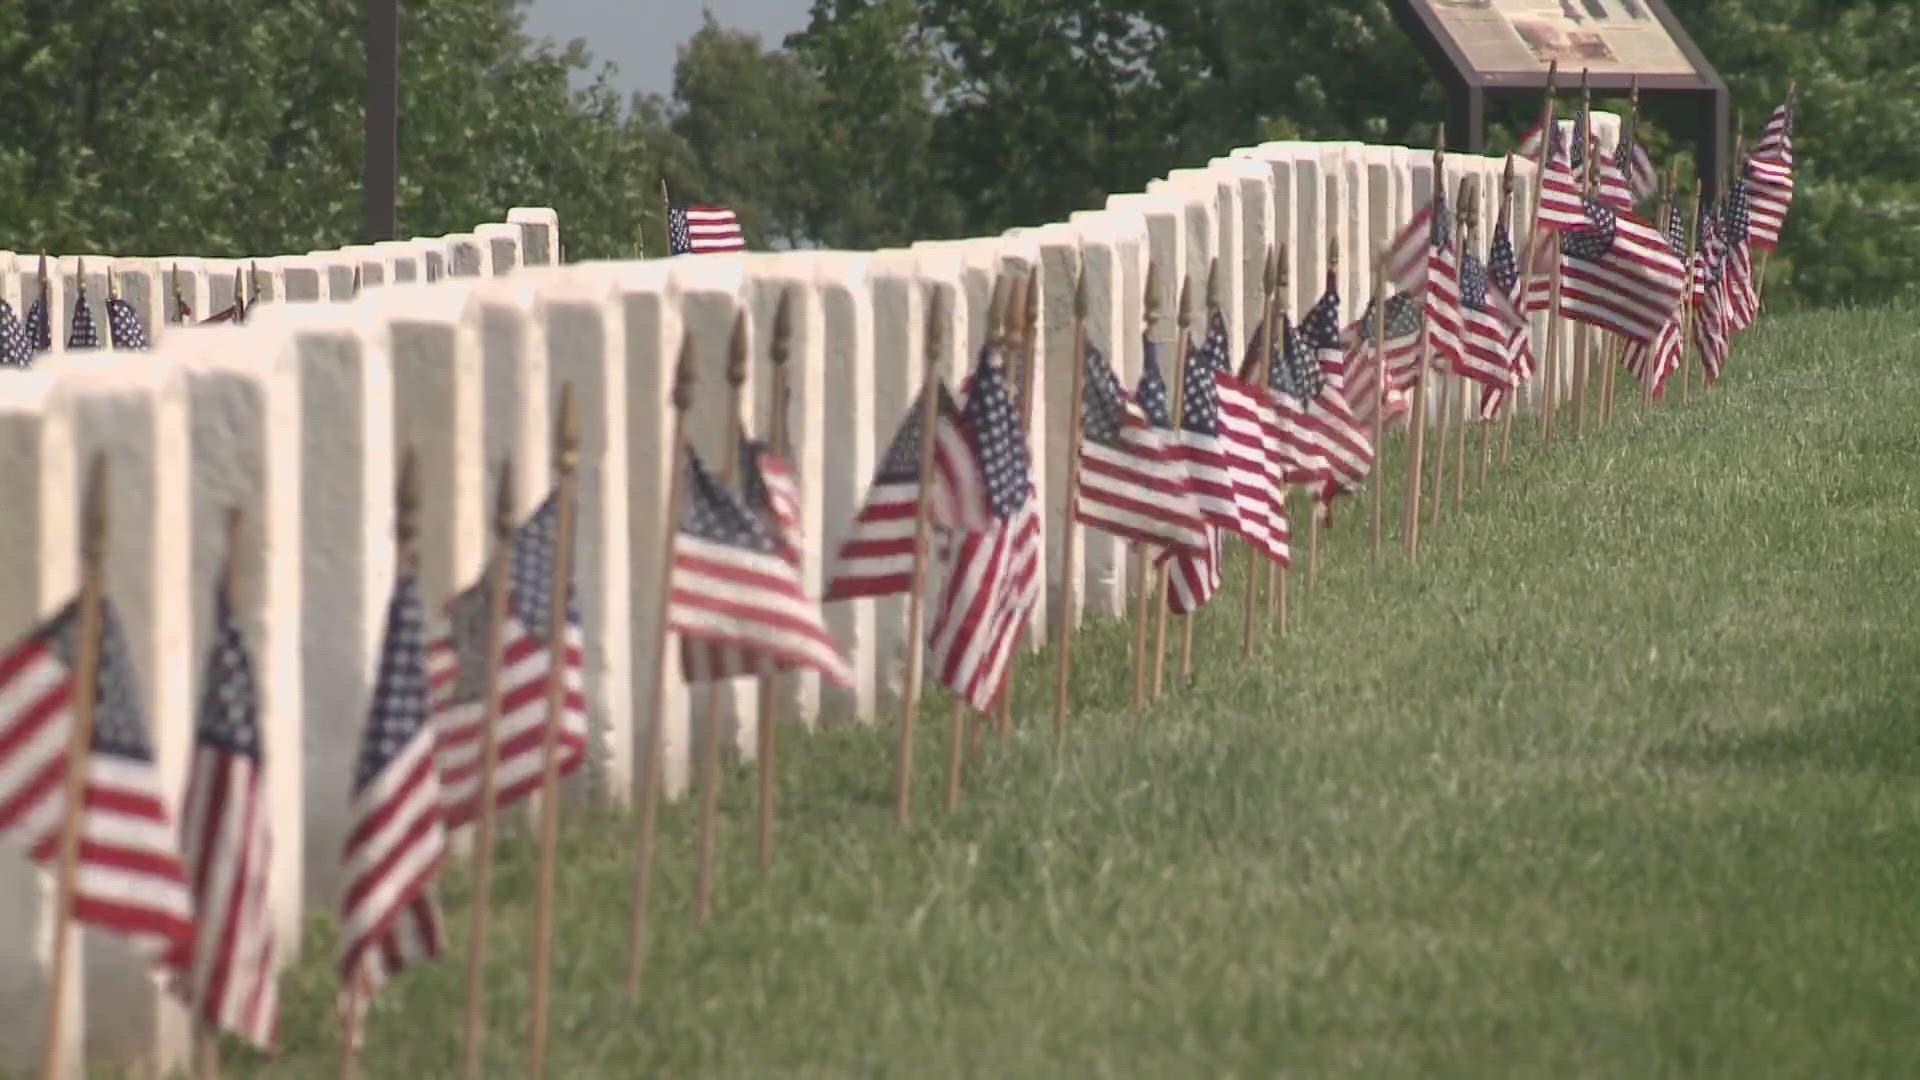 Soldiers Memorial will add 254 St. Louisans who lost their lives in the Vietnam War to the memorial. Jefferson Barracks' Wreath Laying Ceremony starts at 10 a.m.